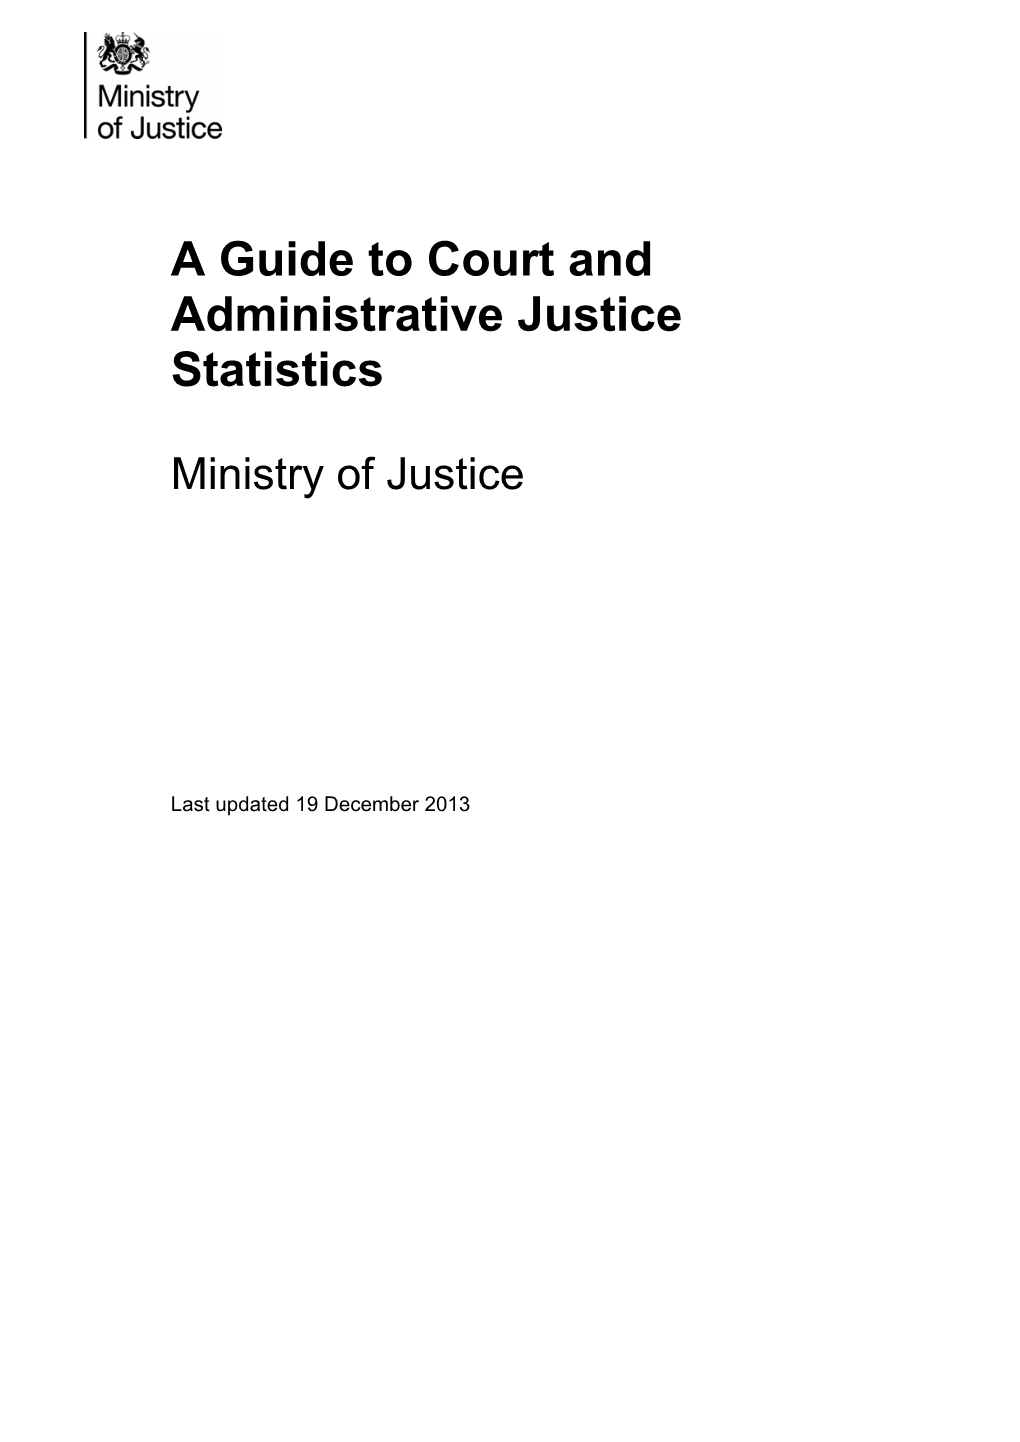 A Guide to Court and Administrative Justice Statistics